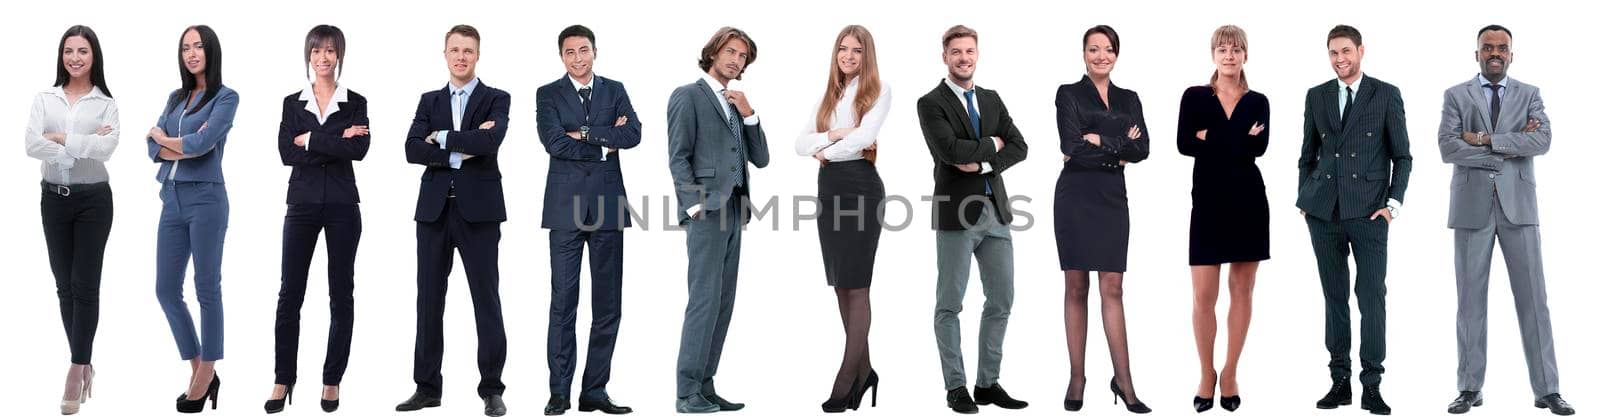 group of successful business people isolated on white by asdf